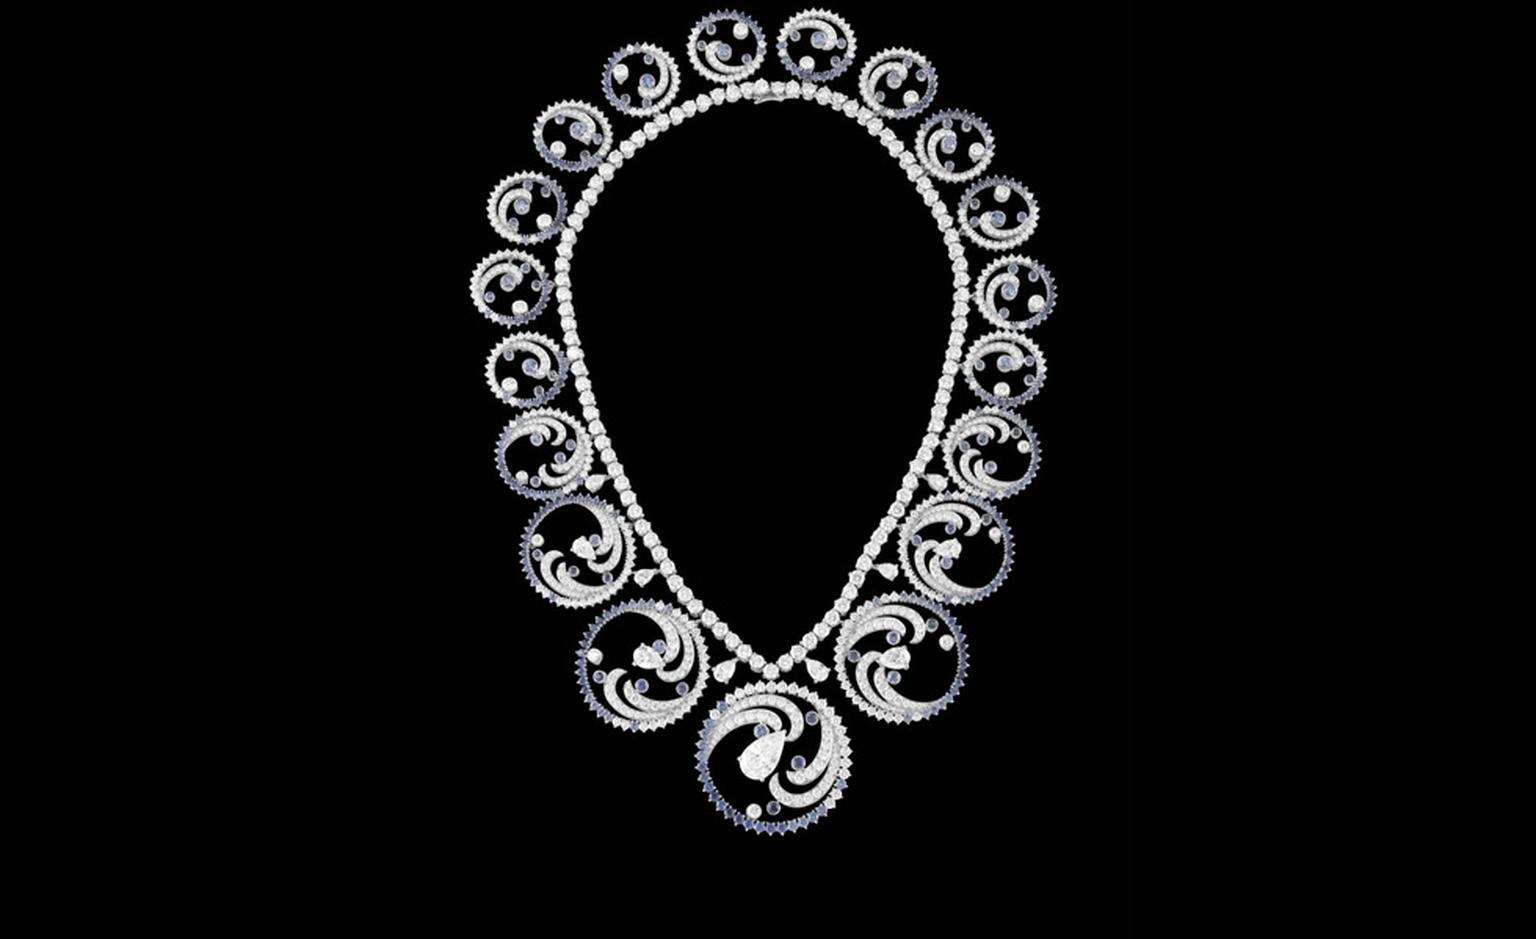 The Van Cleef & Arpels Ocean necklace can be worn like this or transformed into a more regal tiara.